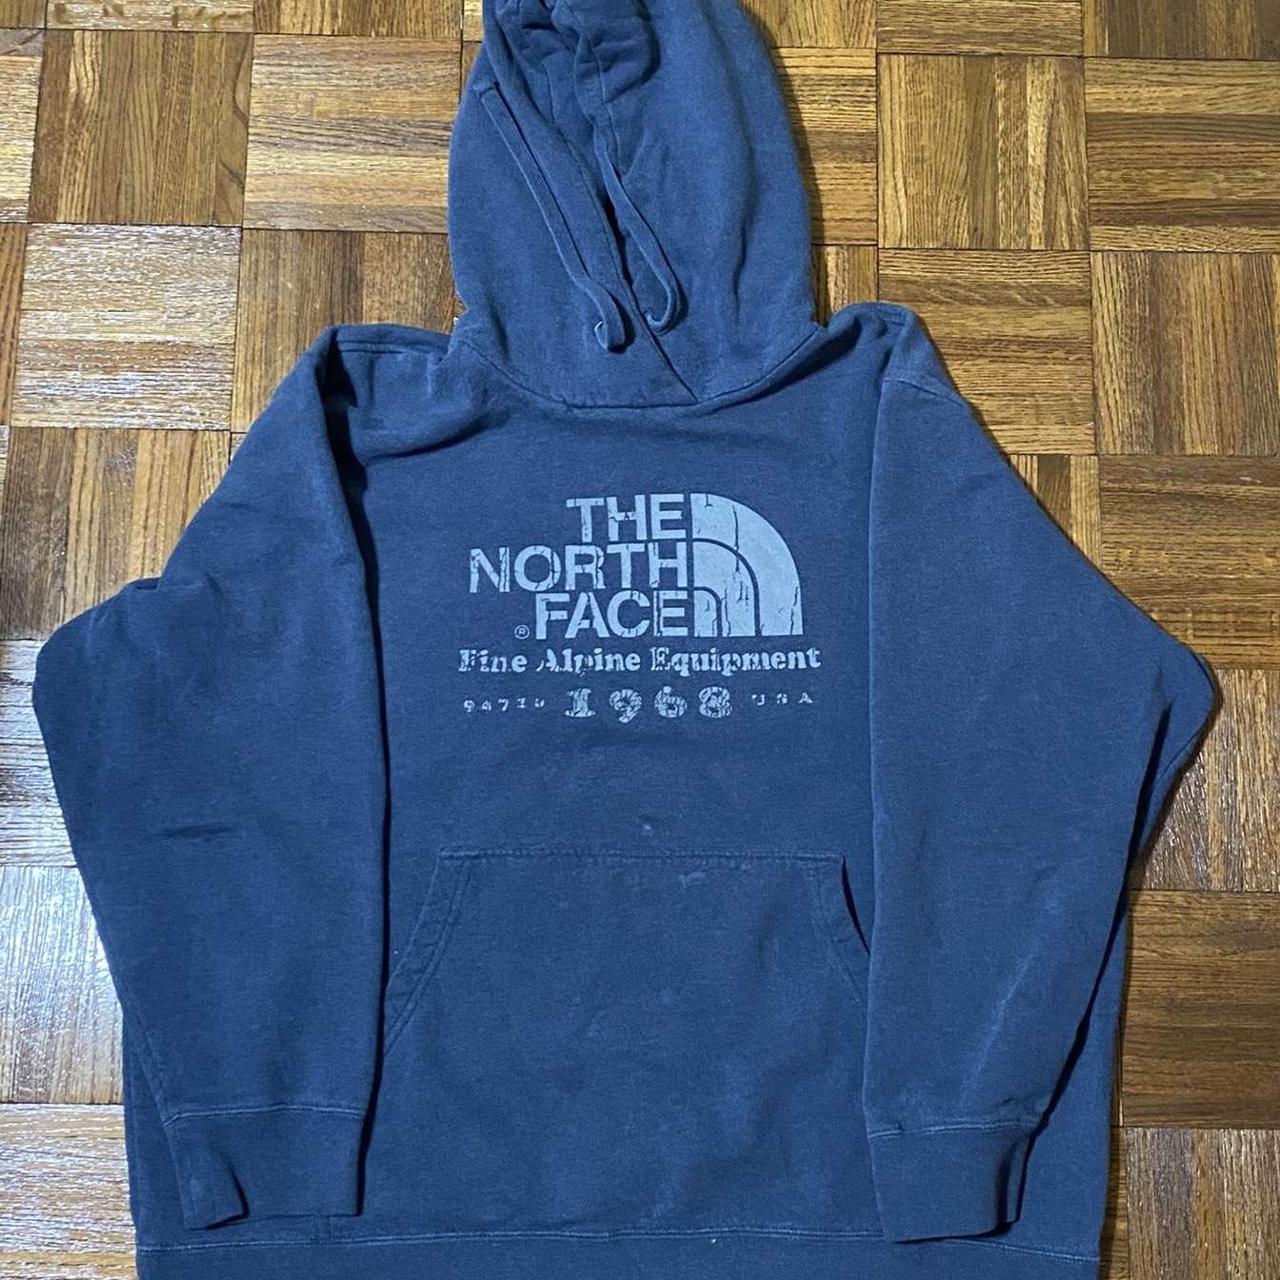 The North Face Hoodie Minor Flaws As Shown Size Xxl Depop